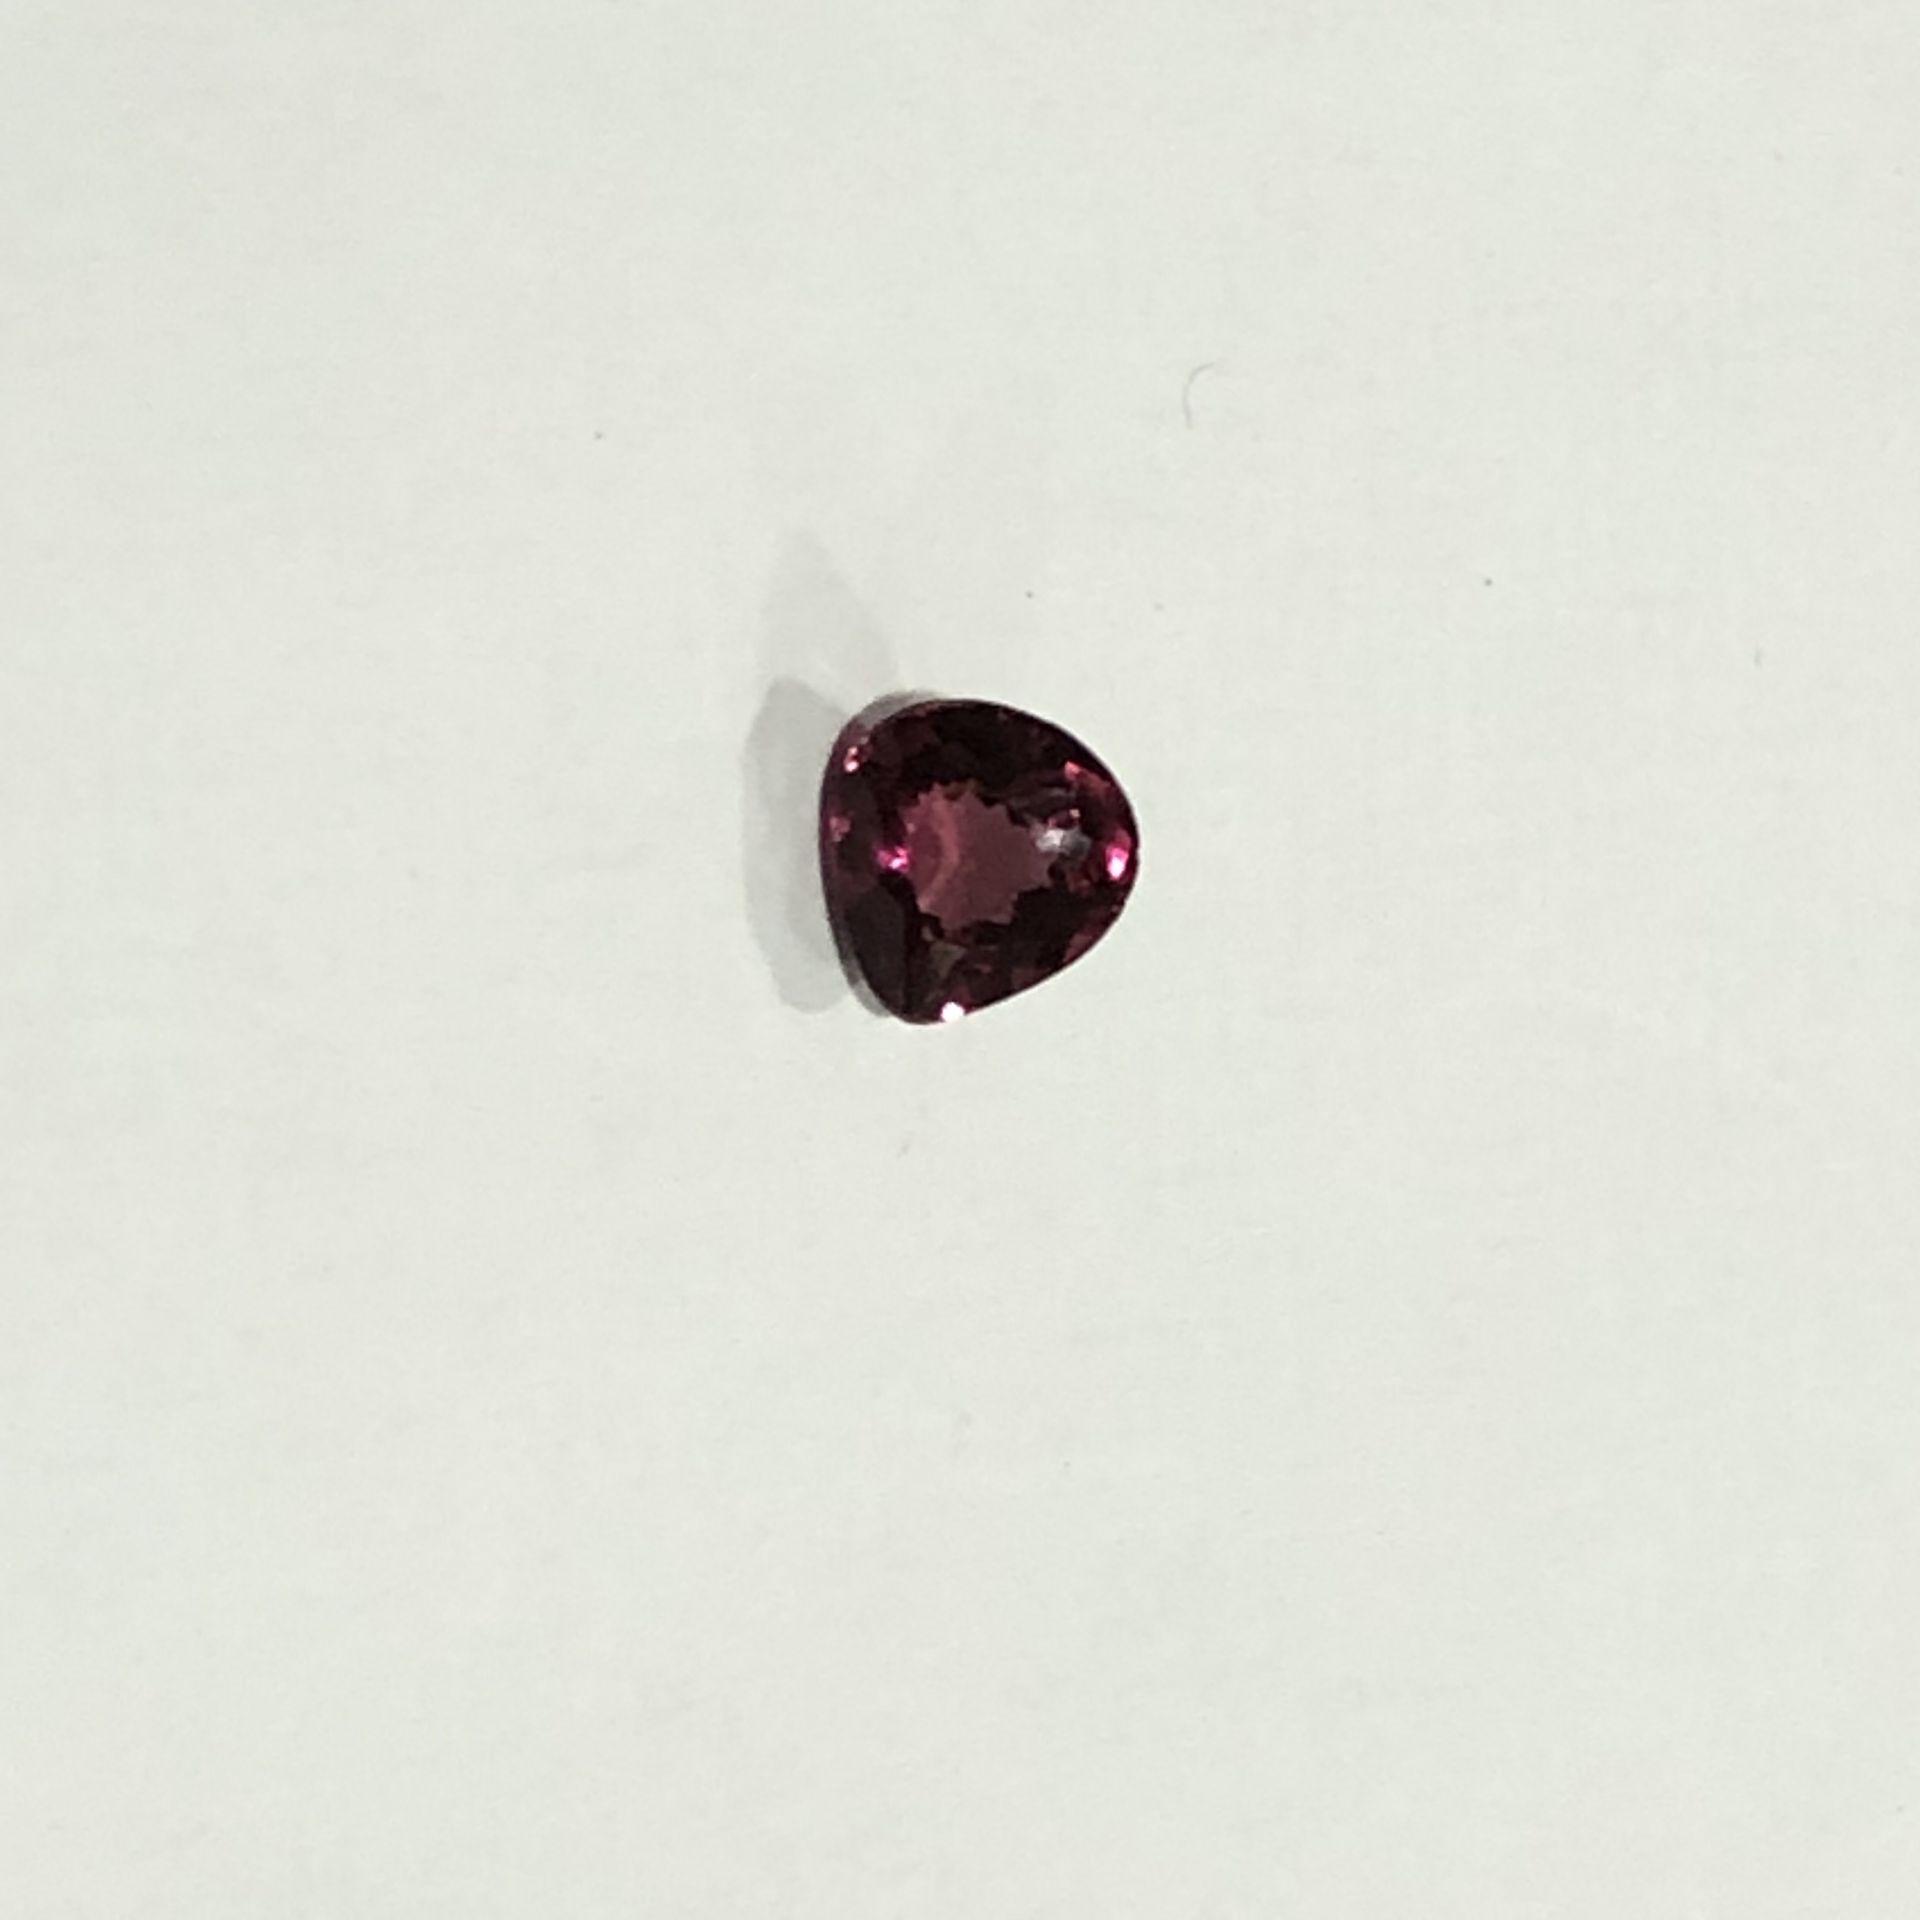 0.79ct Natural Rubellite with IGI Certificate - Image 5 of 8